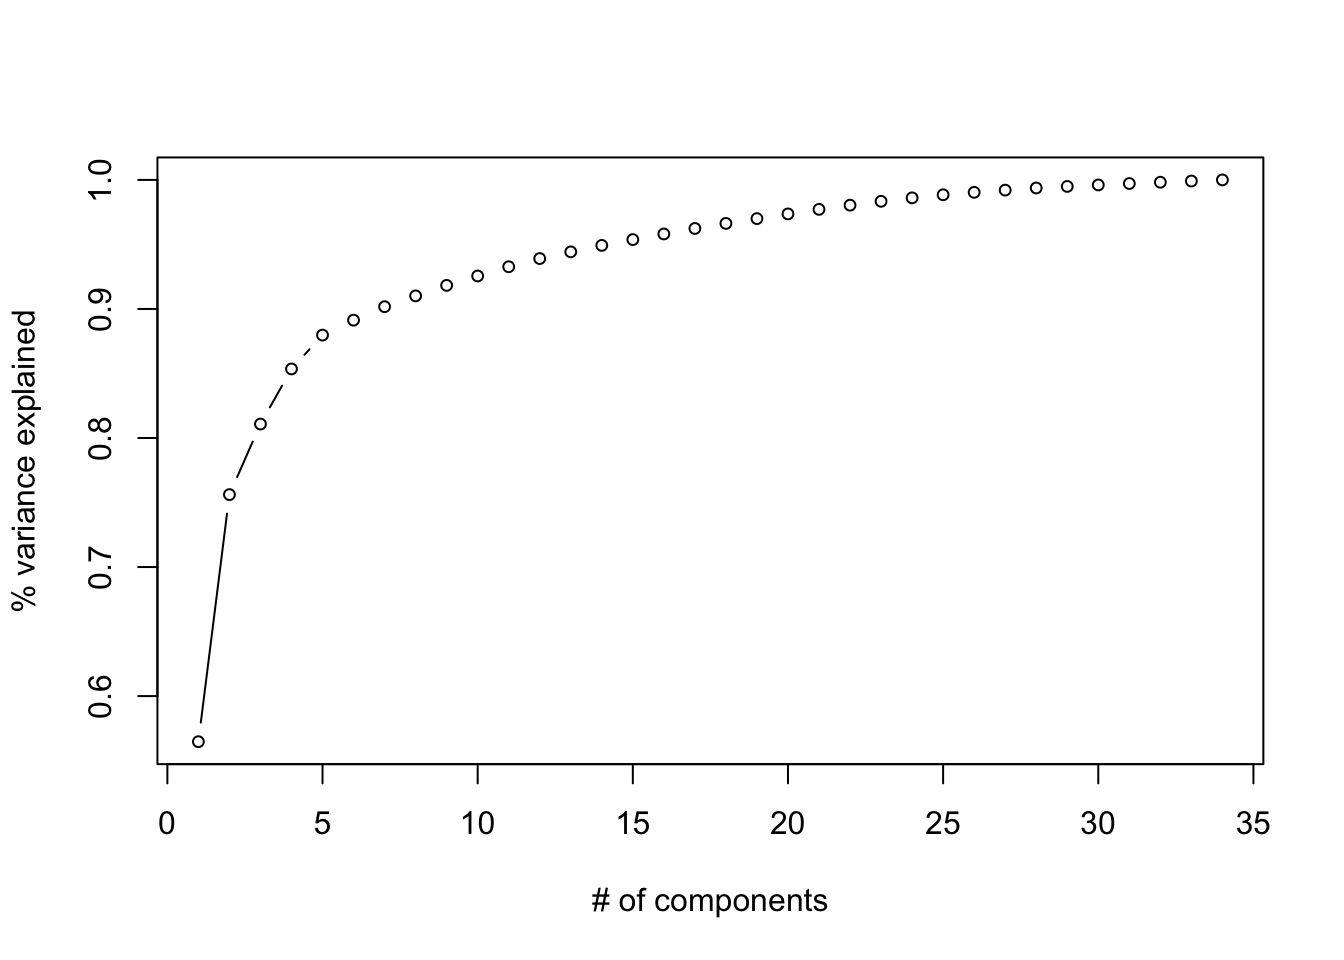 Cumulative proportion of variance explained by rank of the decomposition (i.e. the number of components)